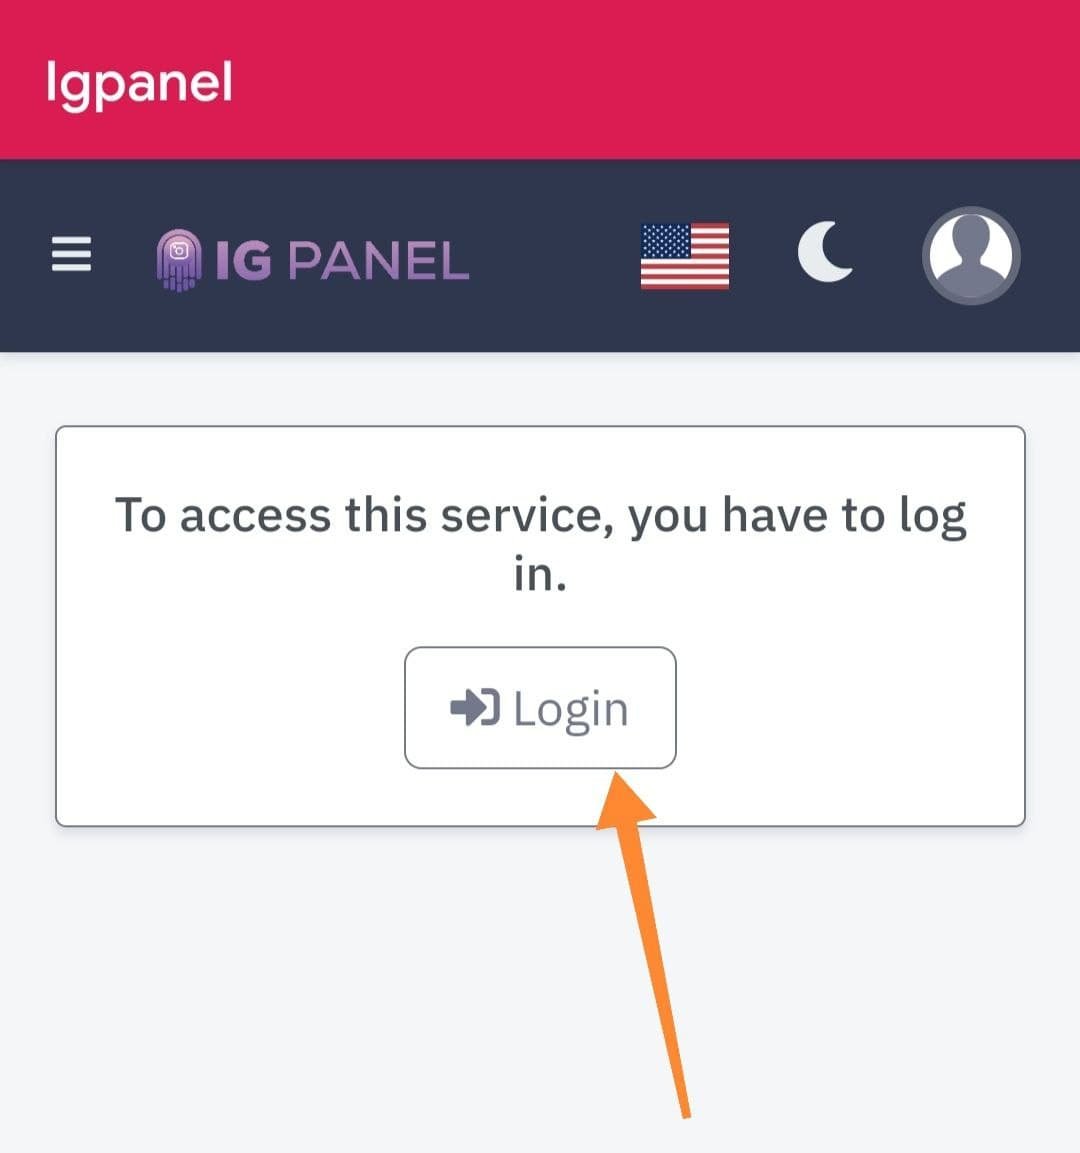 Login Before Accessing Services